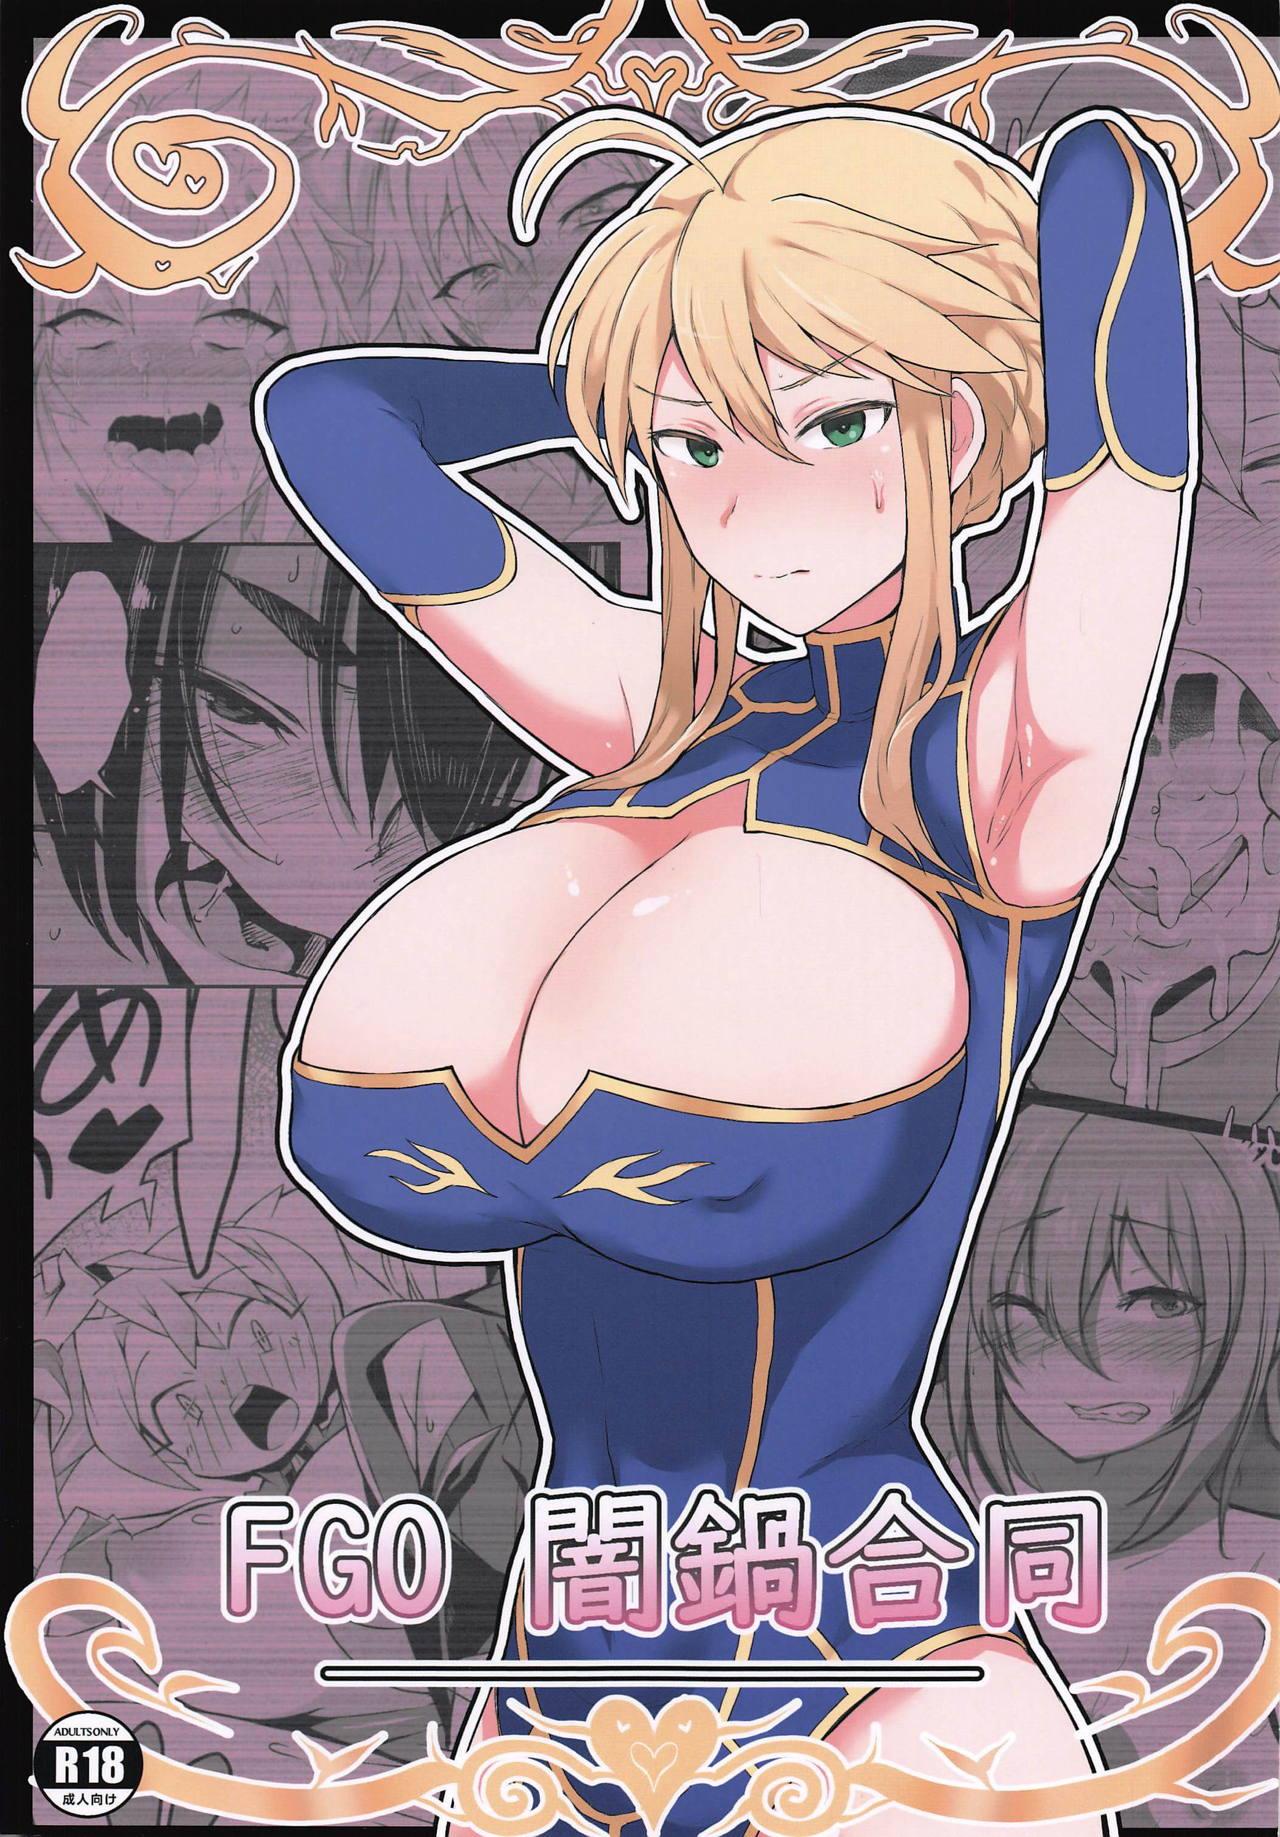 Licking Pussy FGO Yaminabe Goudou - Fate grand order Baile - Page 1